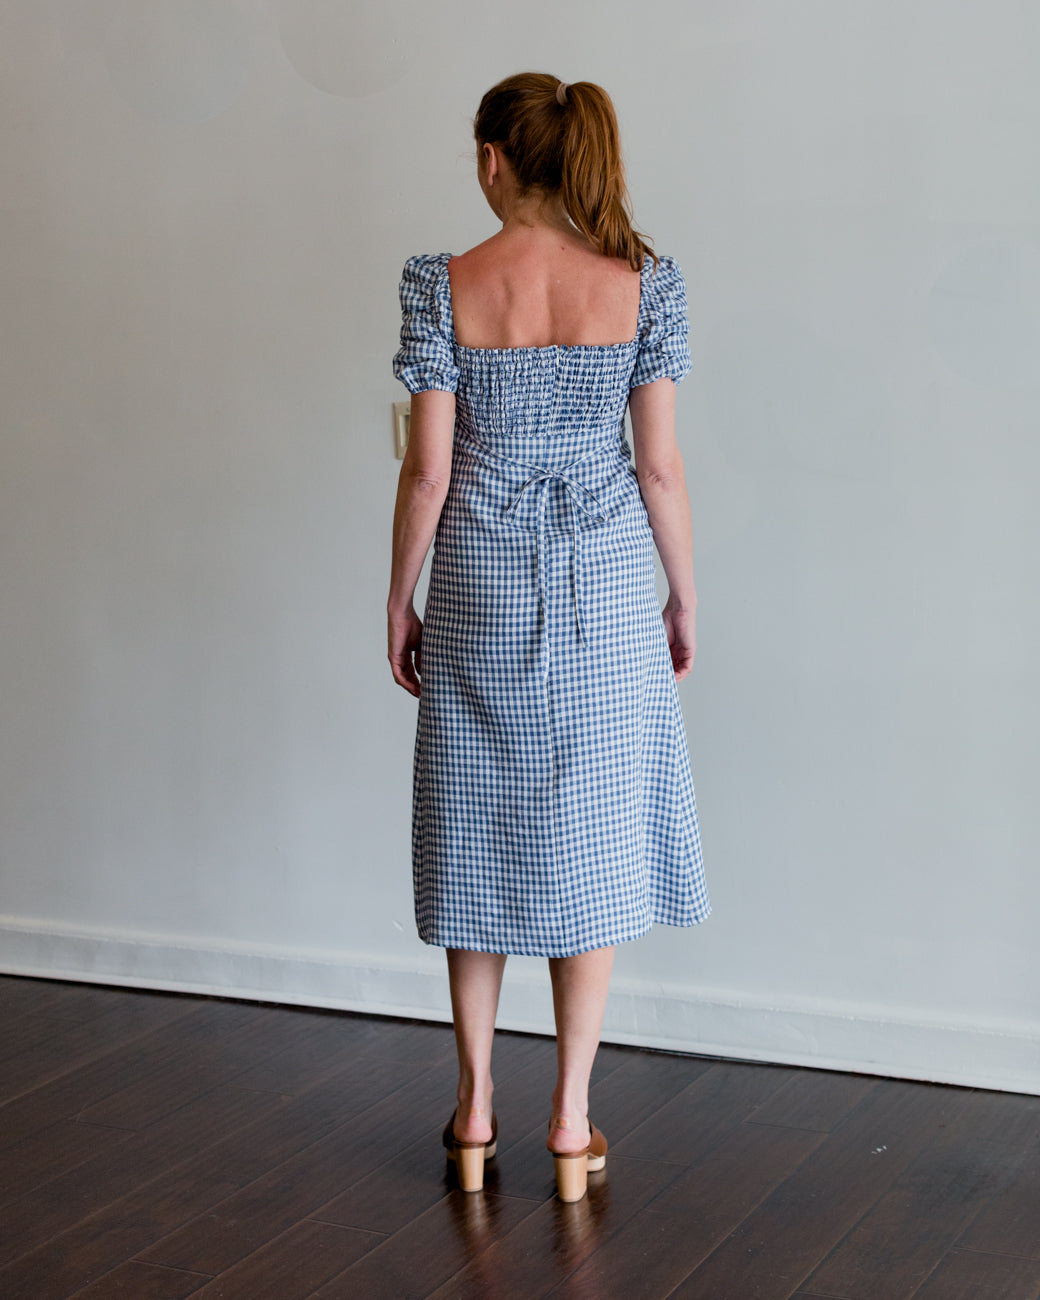 Emerson Fry Gathered Sleeve Dress in Delfini Linen